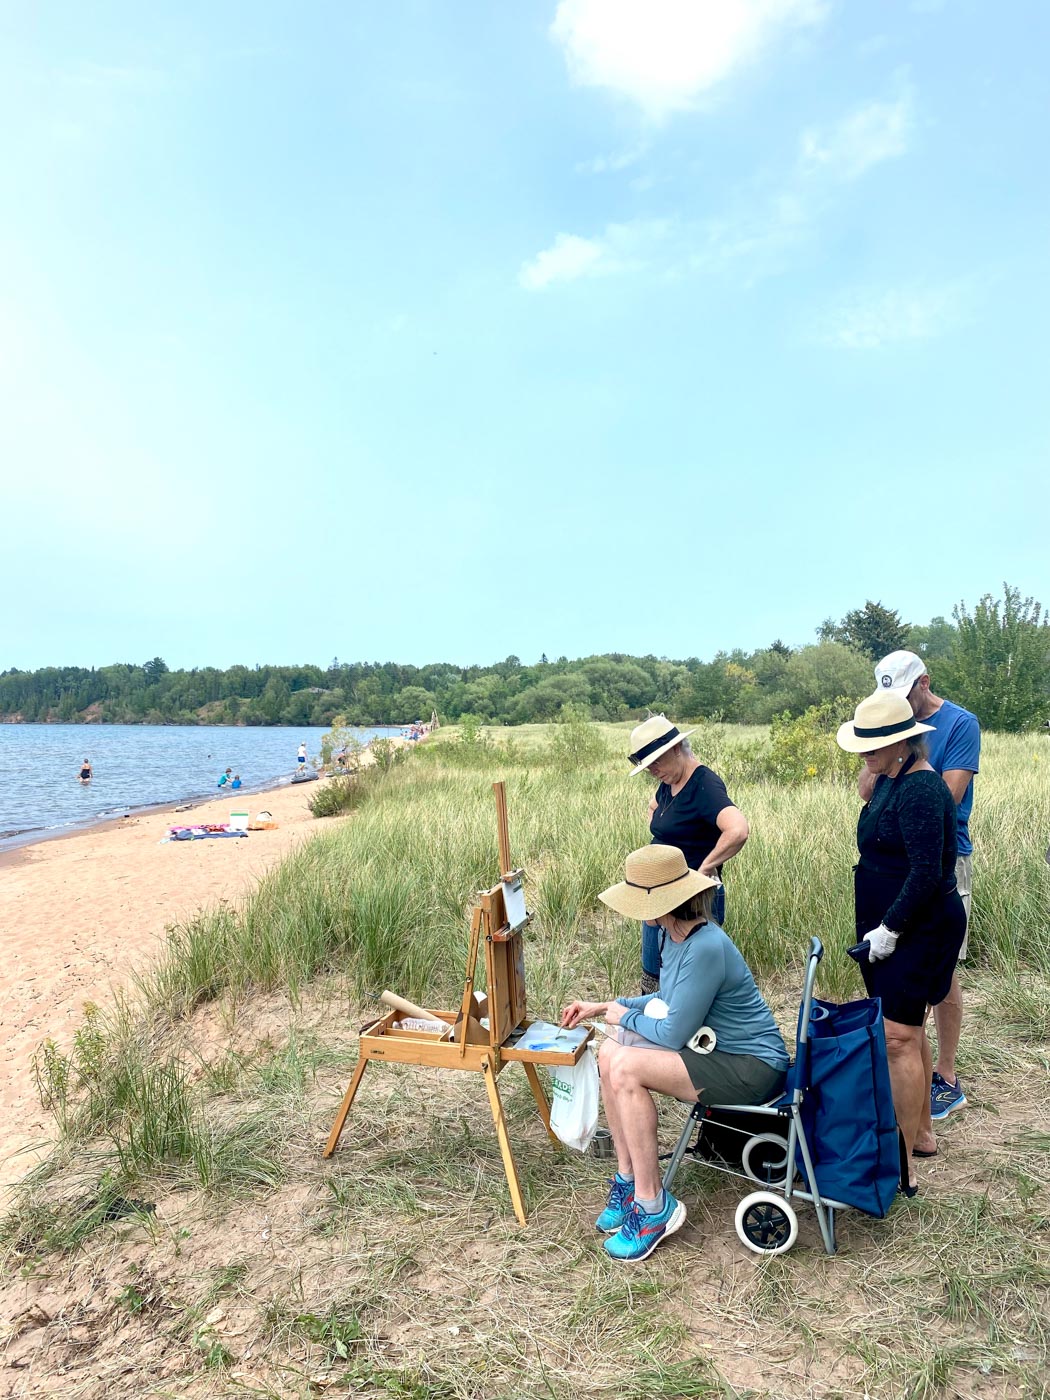 people gathered painting at the beach during the day